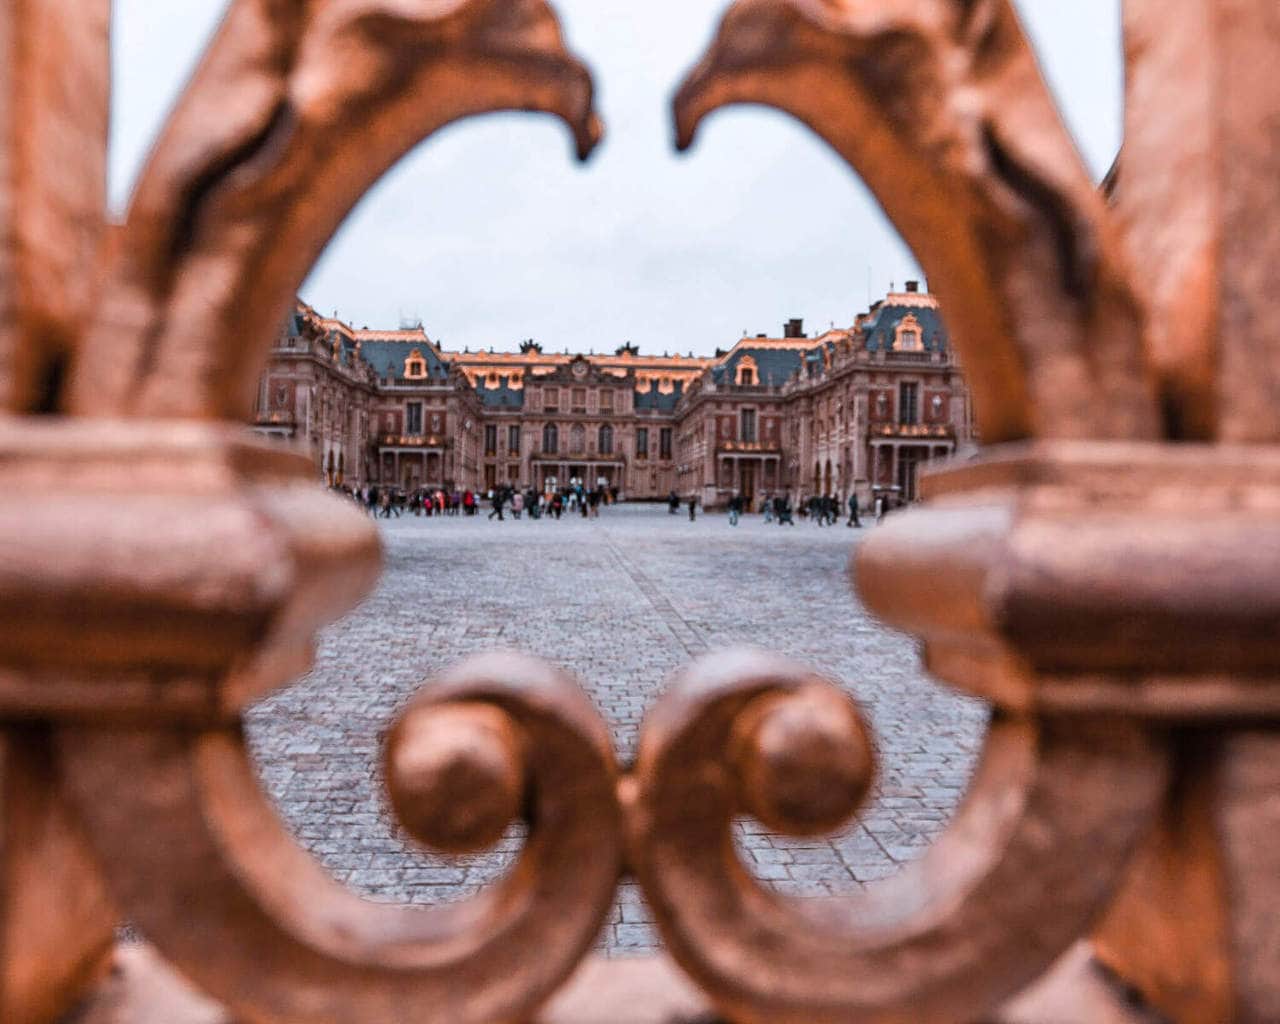 Looking through the gates at Versailles Palace in Paris, France. Find Paris travel tips in this guide to New Year's in Paris.